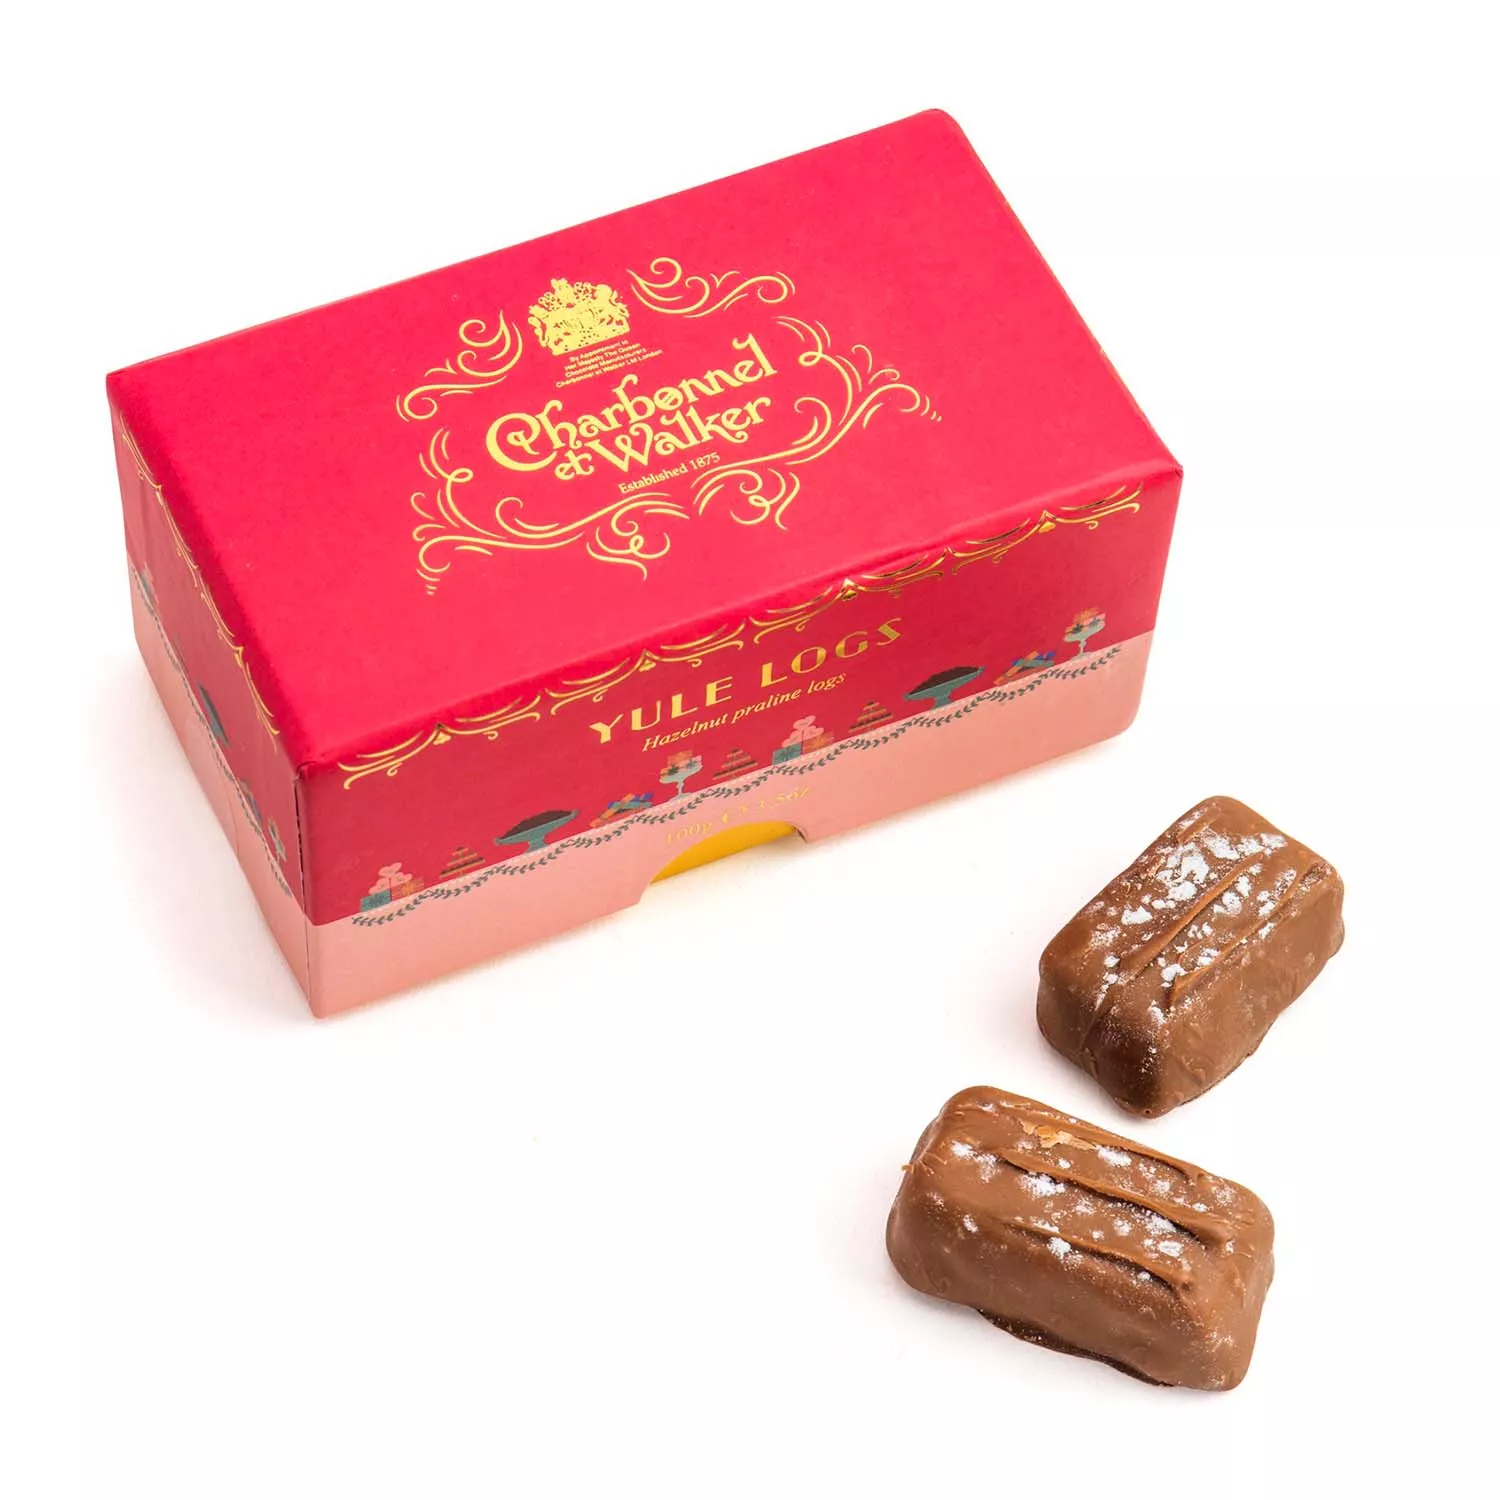 Best of the Best from LA Cookbook - Royal Praline Company